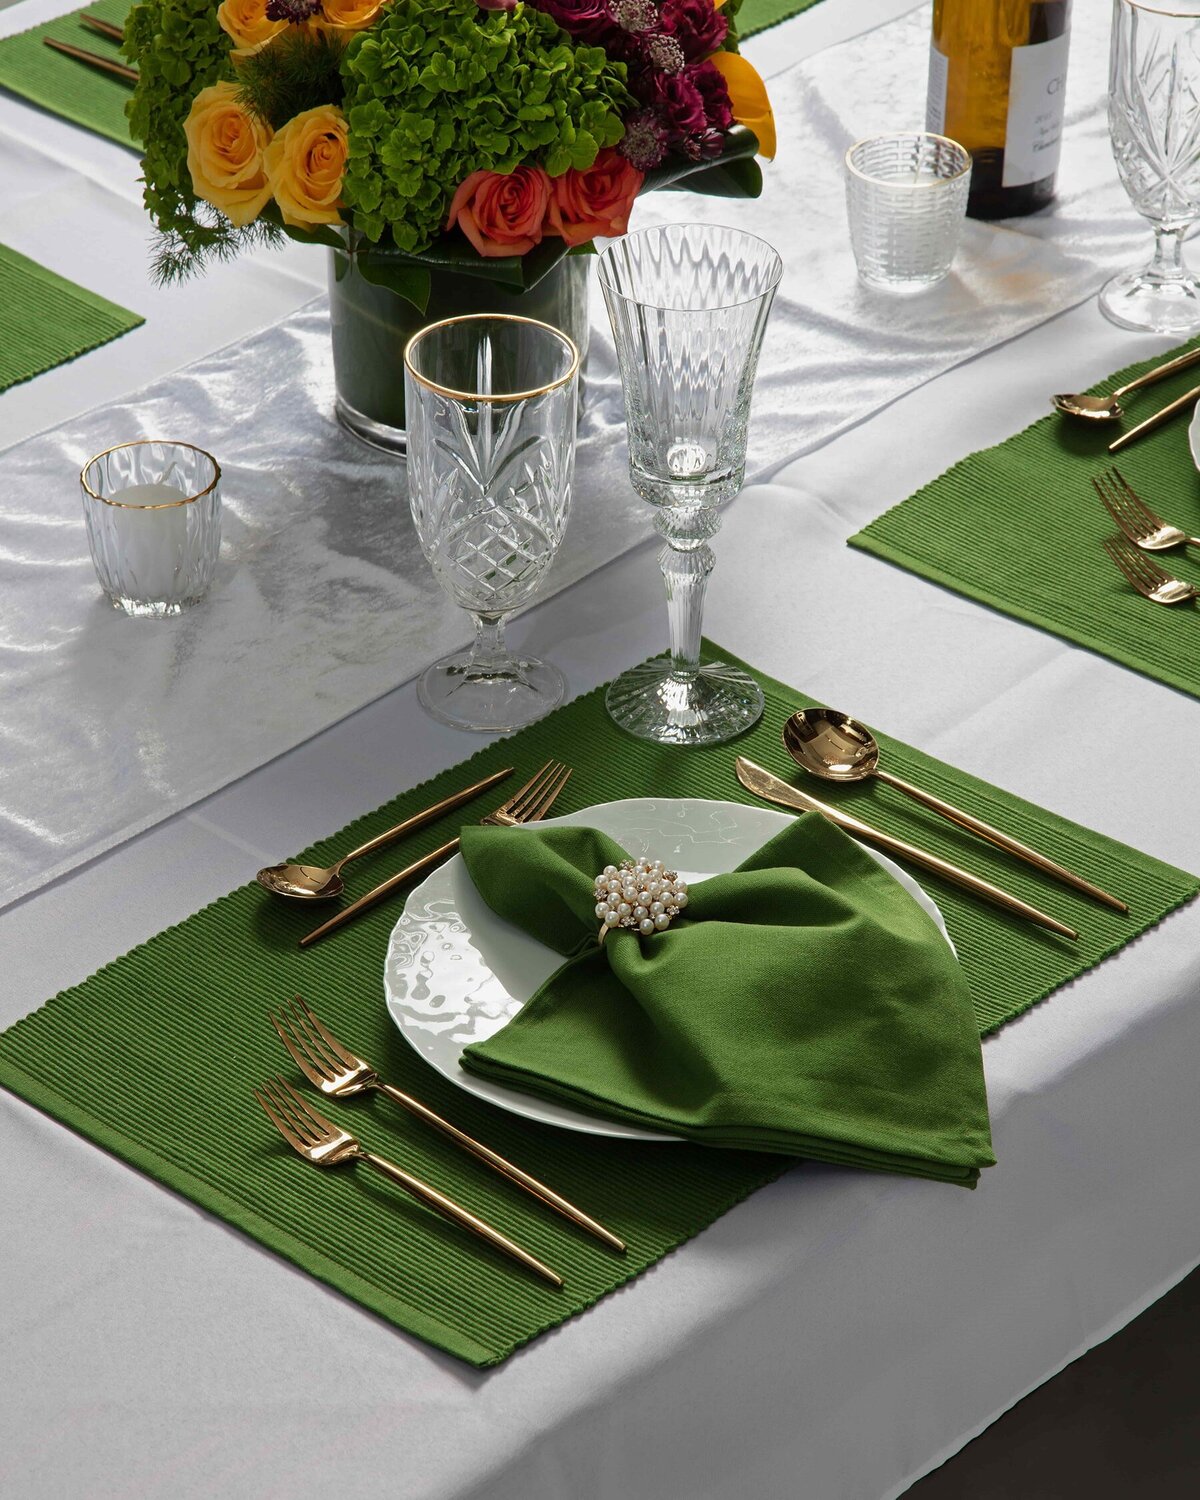 Angies-Tables-evergreen-tablescape-kits-2